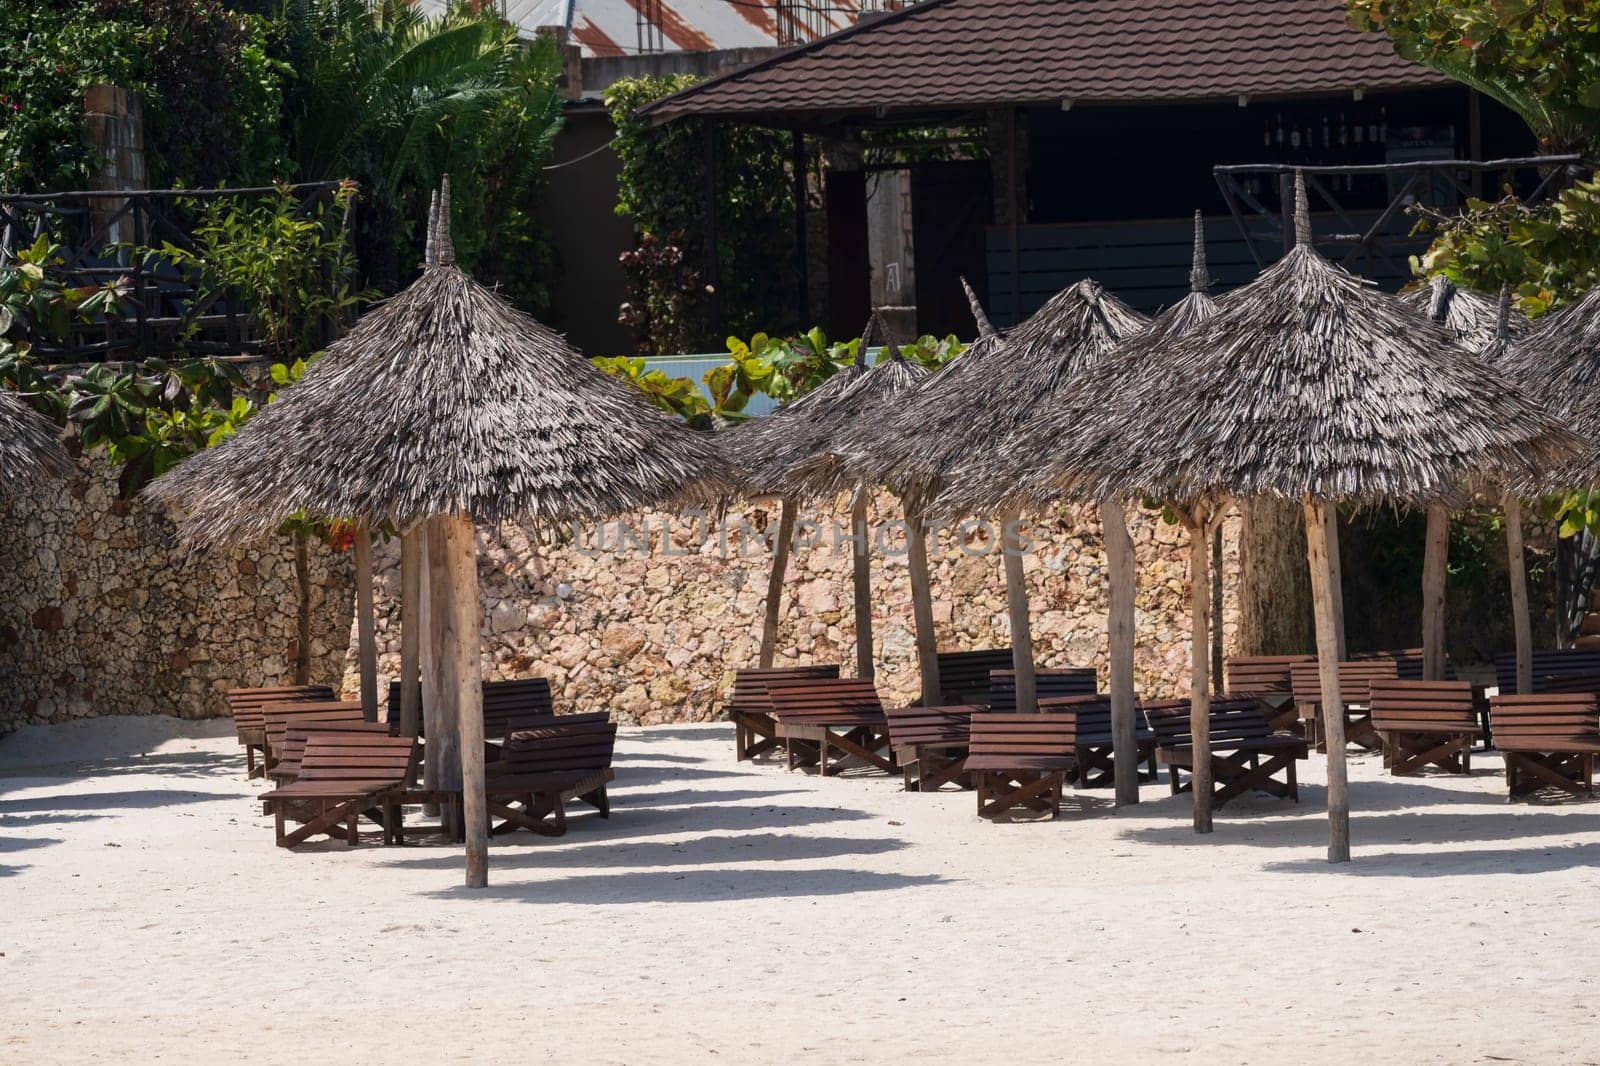 path of wooden umbrellas on sunny day.Luxury beach umbrella at luxurious resort. Summer concept,carefree, rest seaside.